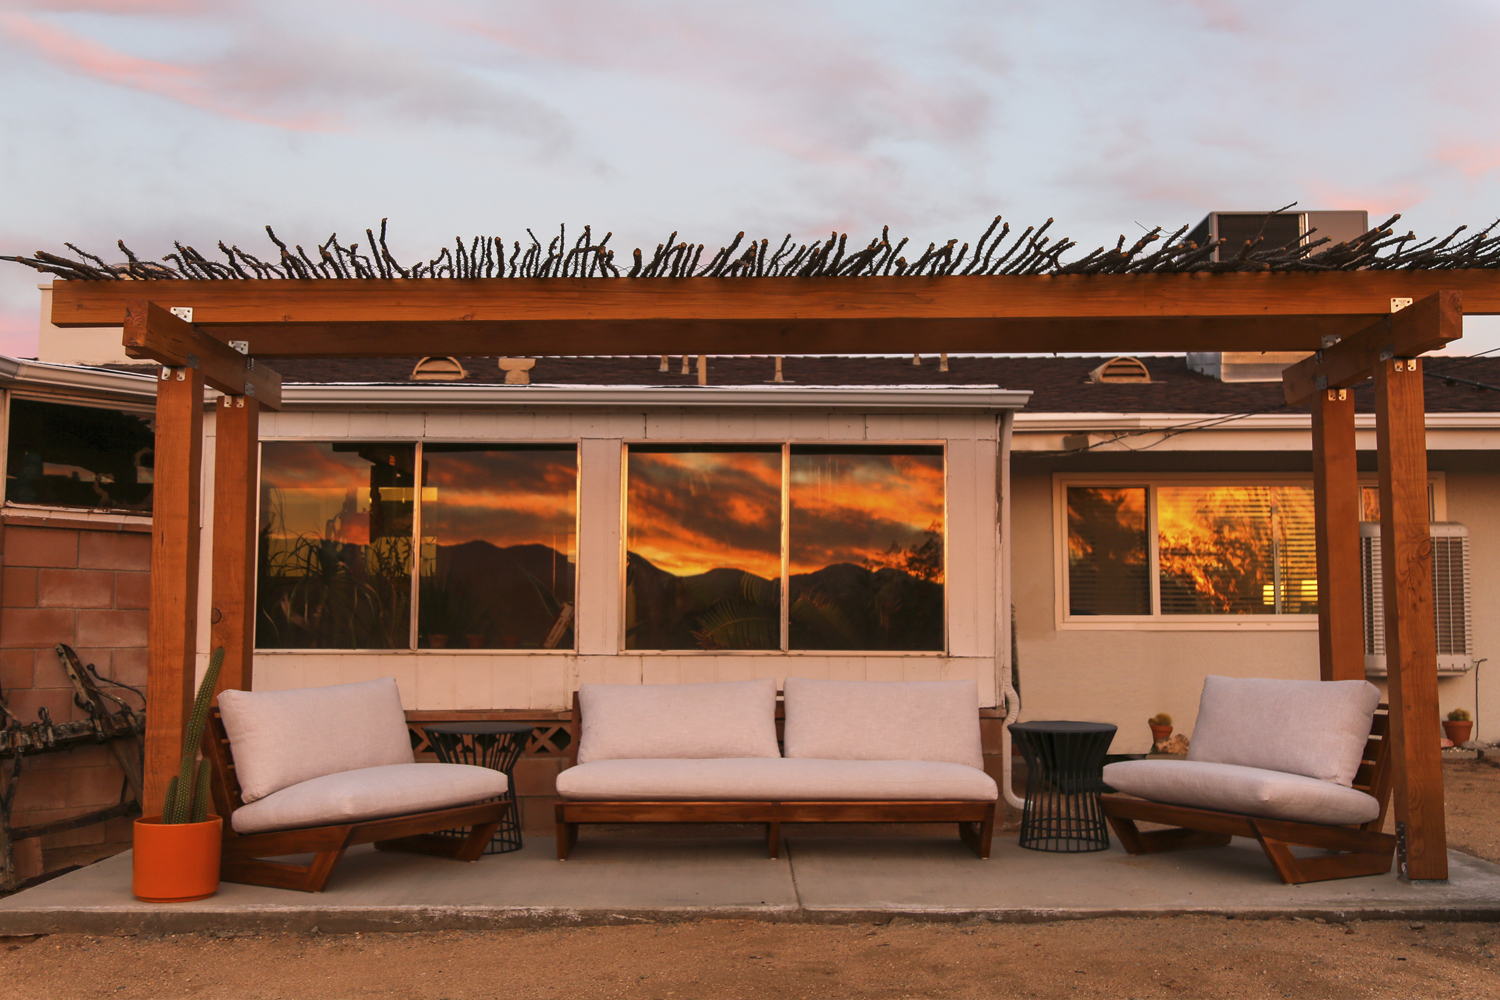 Sunset view of the backyard pergola with the sunset reflected in the home's windows at Las Palmas vacation rental in Yucca Valley, California.